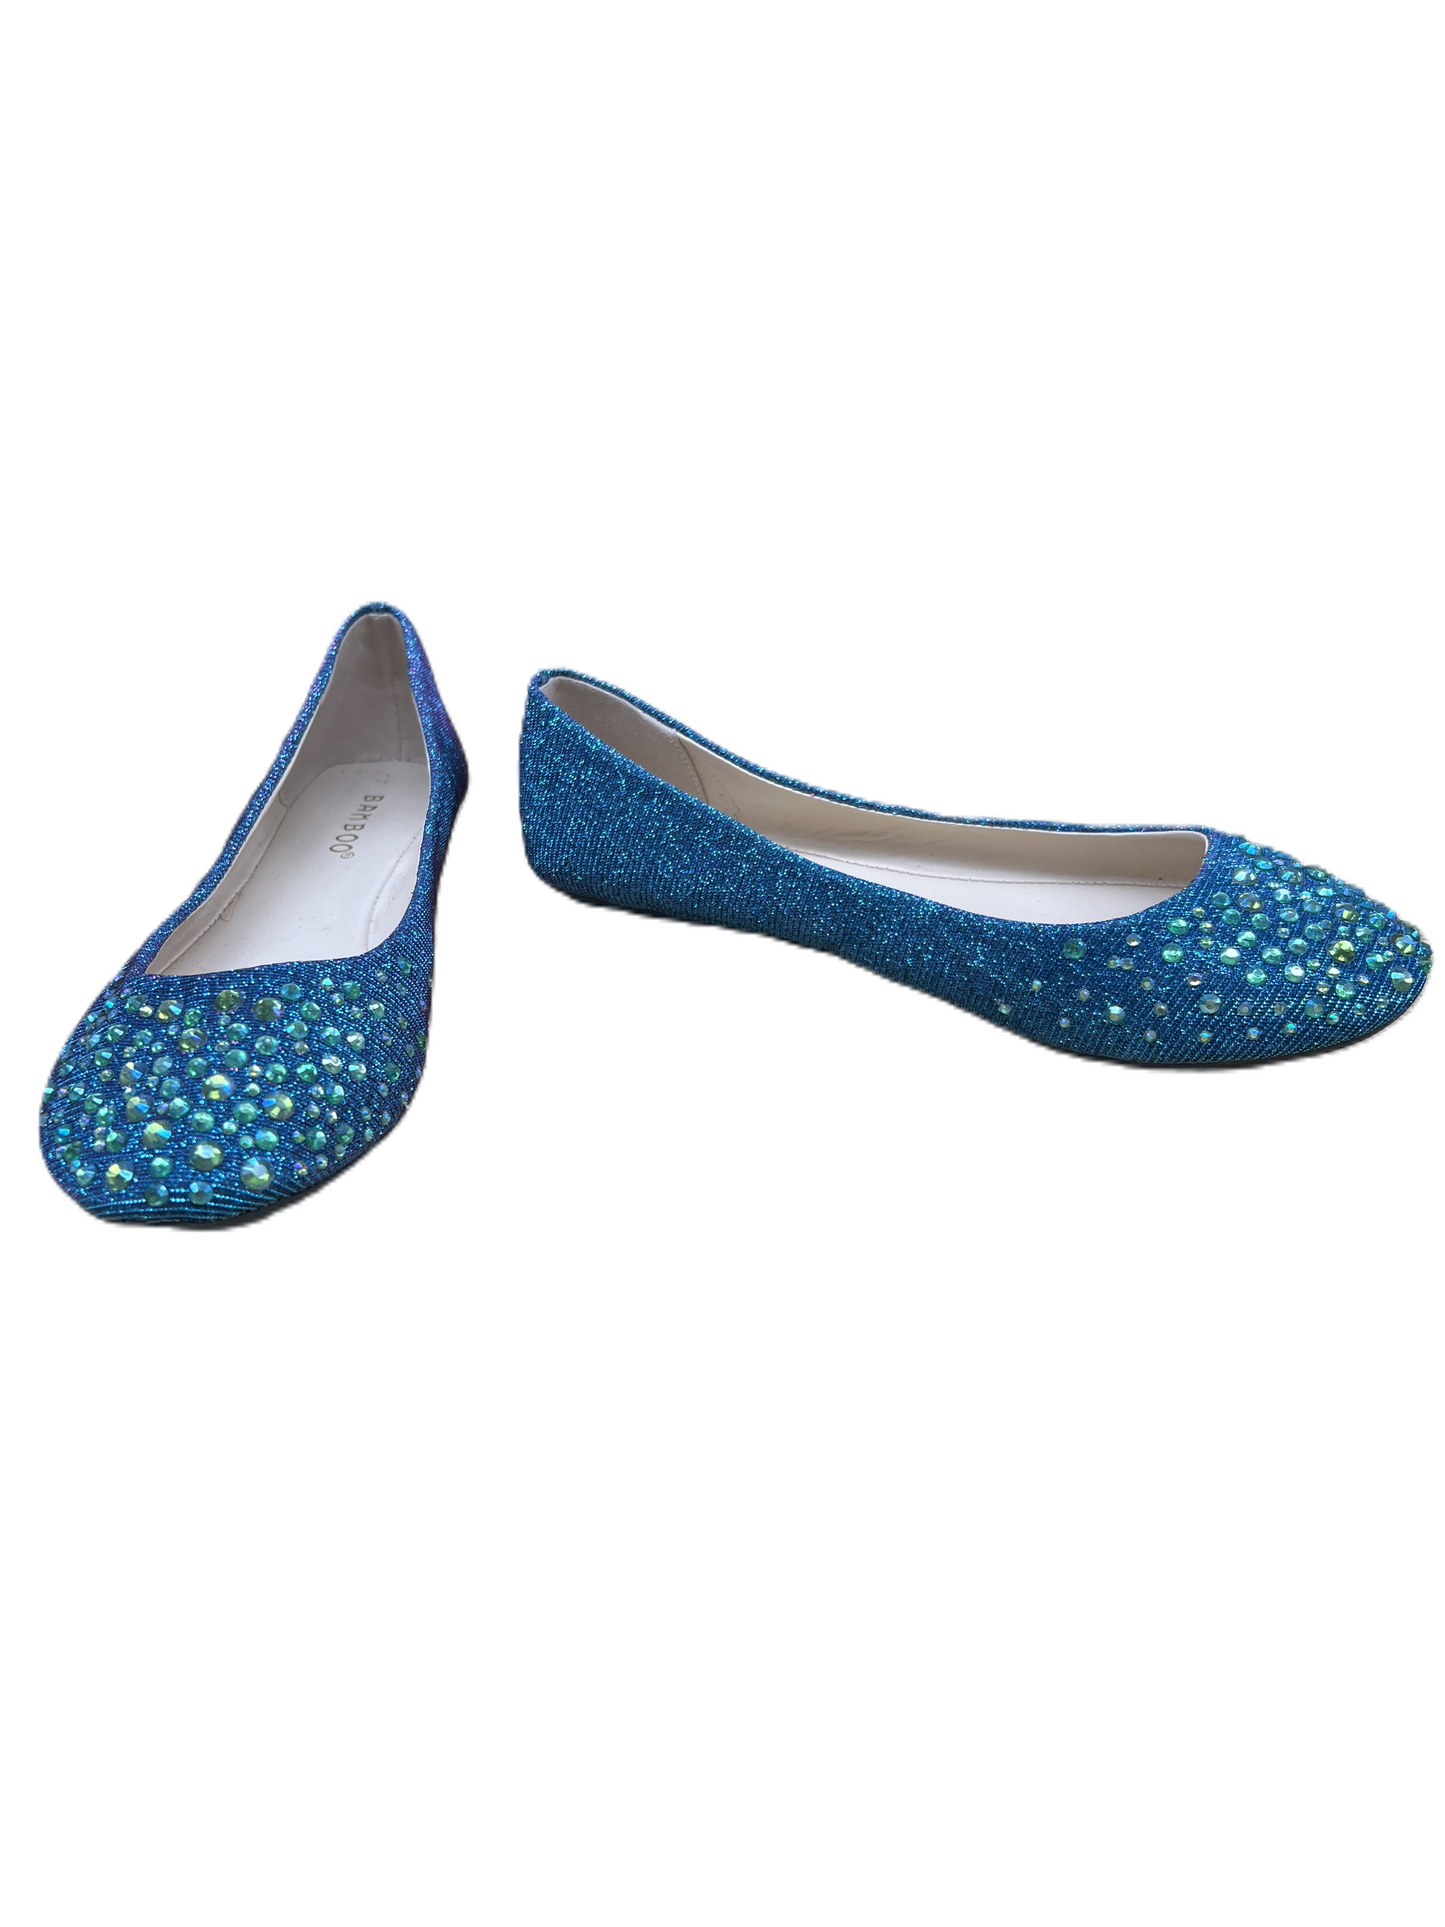 Shoes Flats Ballet By Bamboo  Size: 6.5